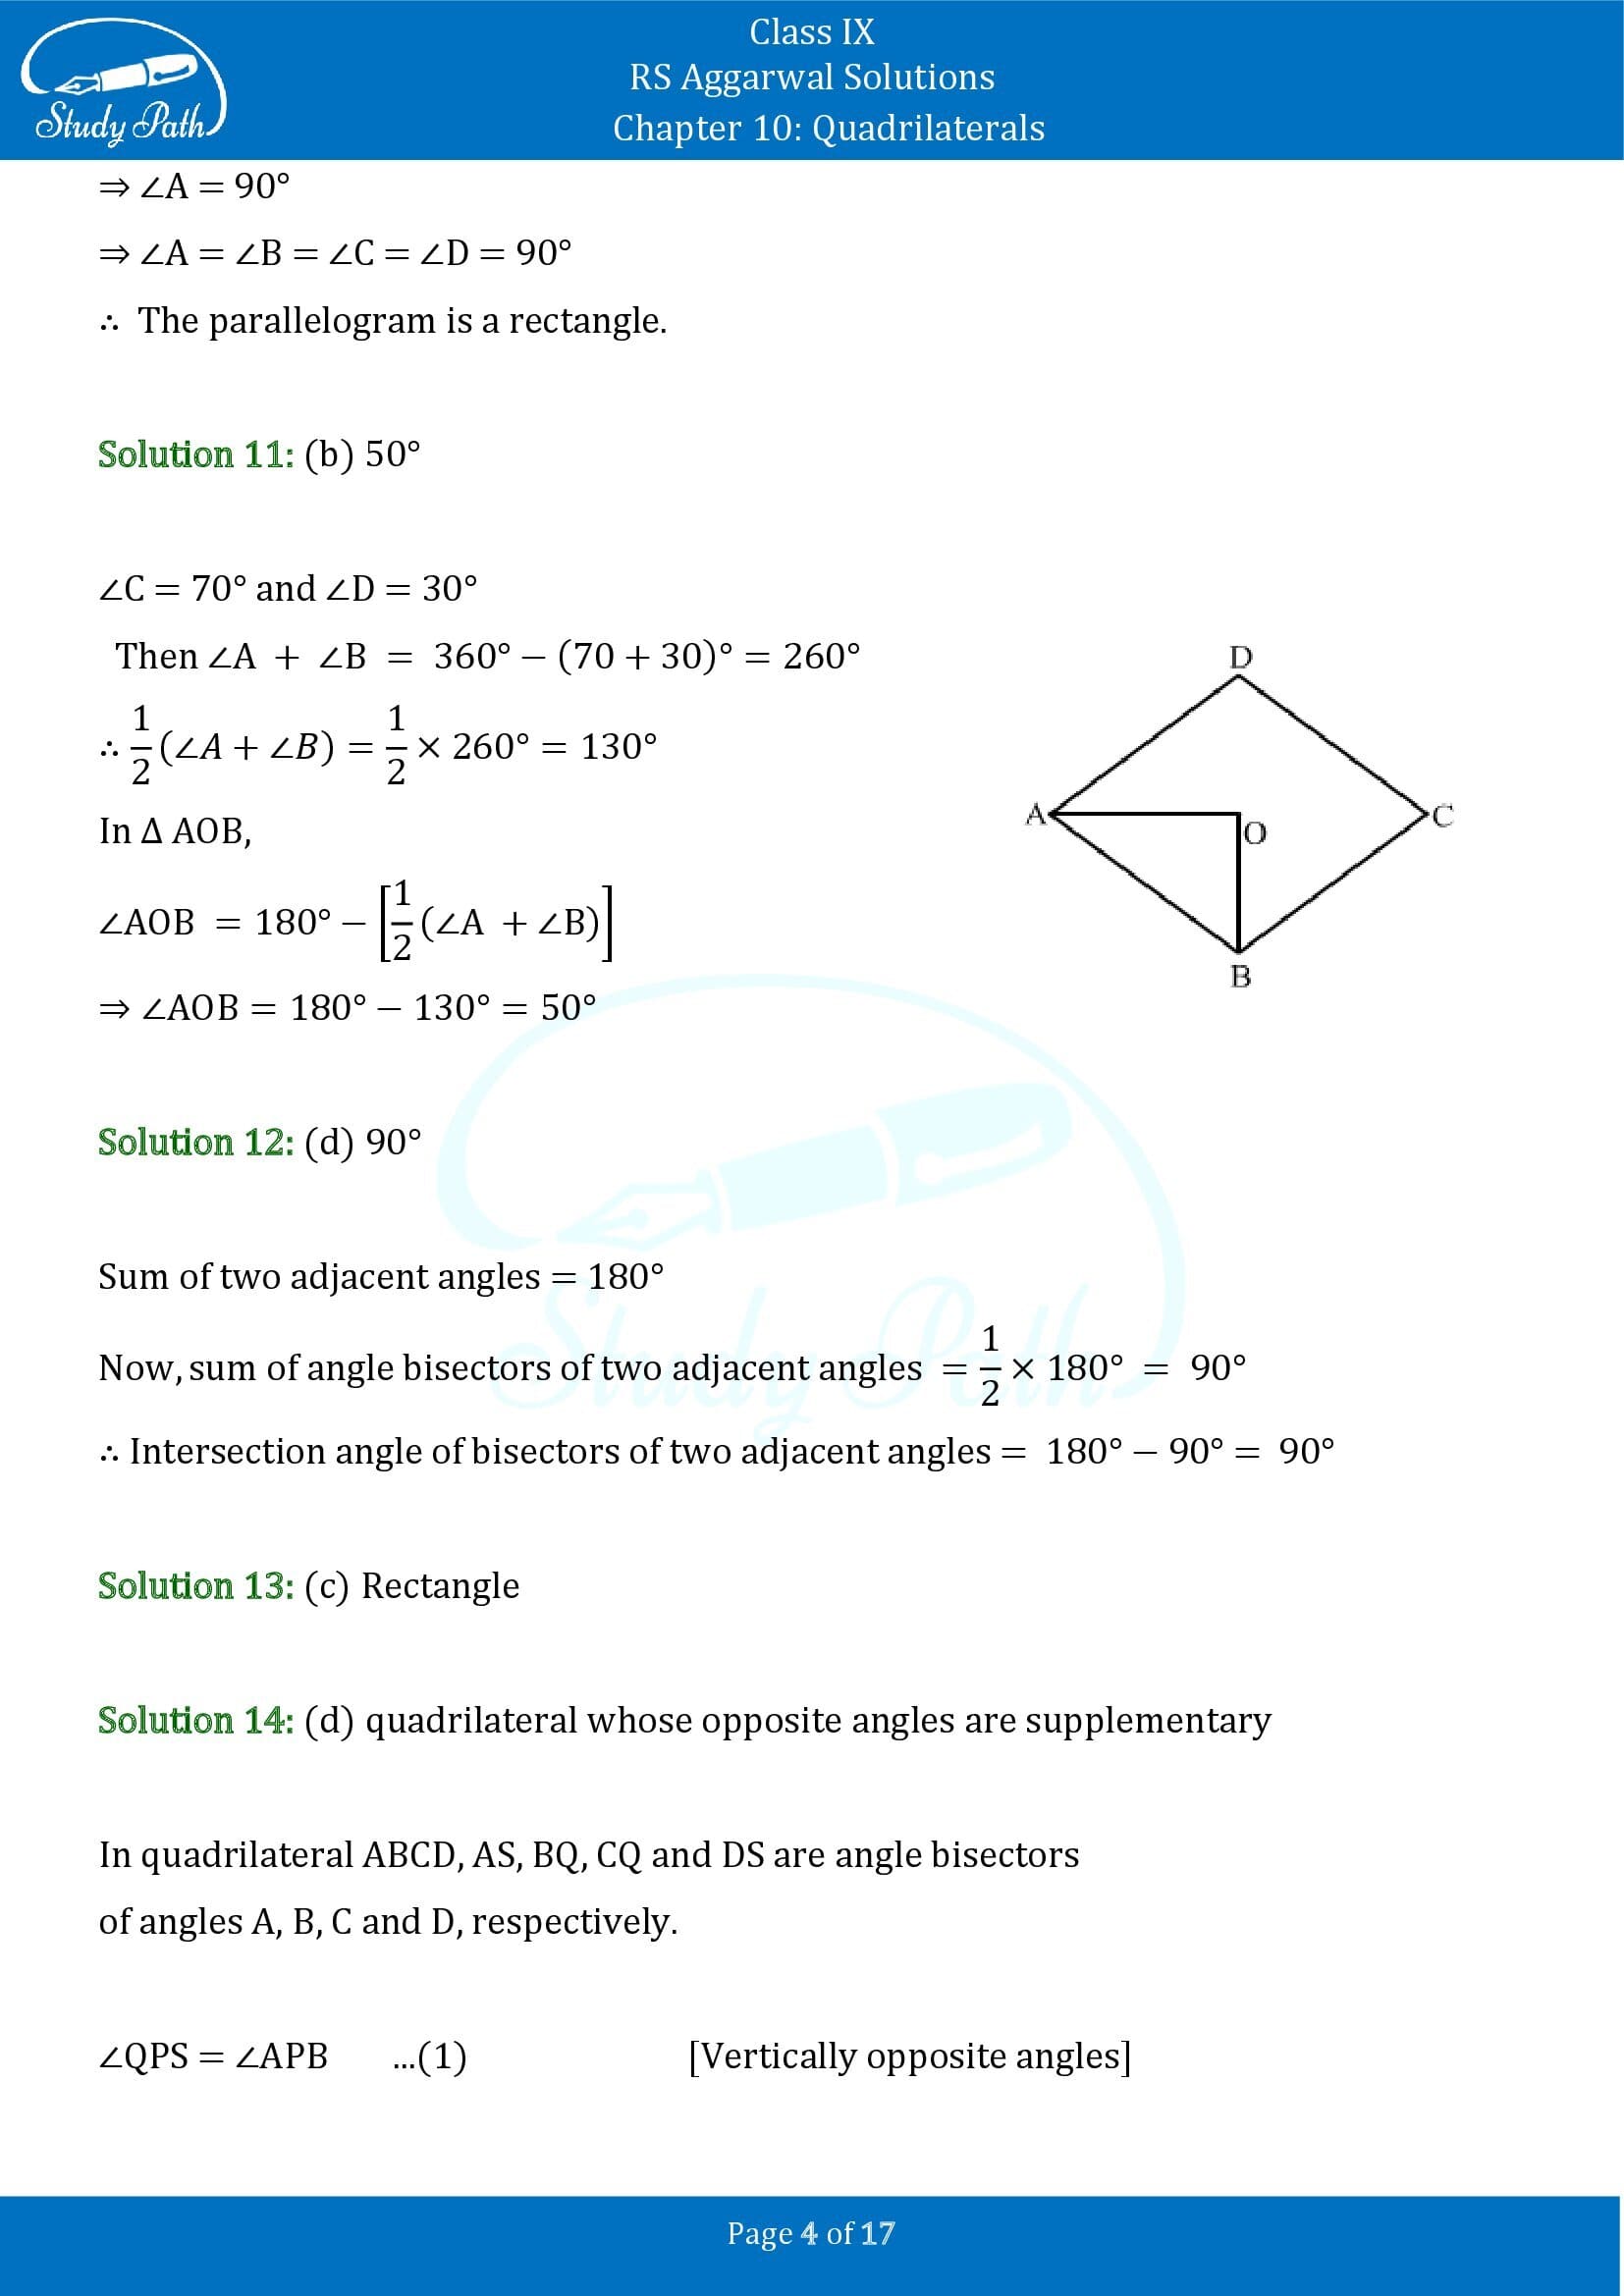 RS Aggarwal Solutions Class 9 Chapter 10 Quadrilaterals Multiple Choice Questions MCQs 00004